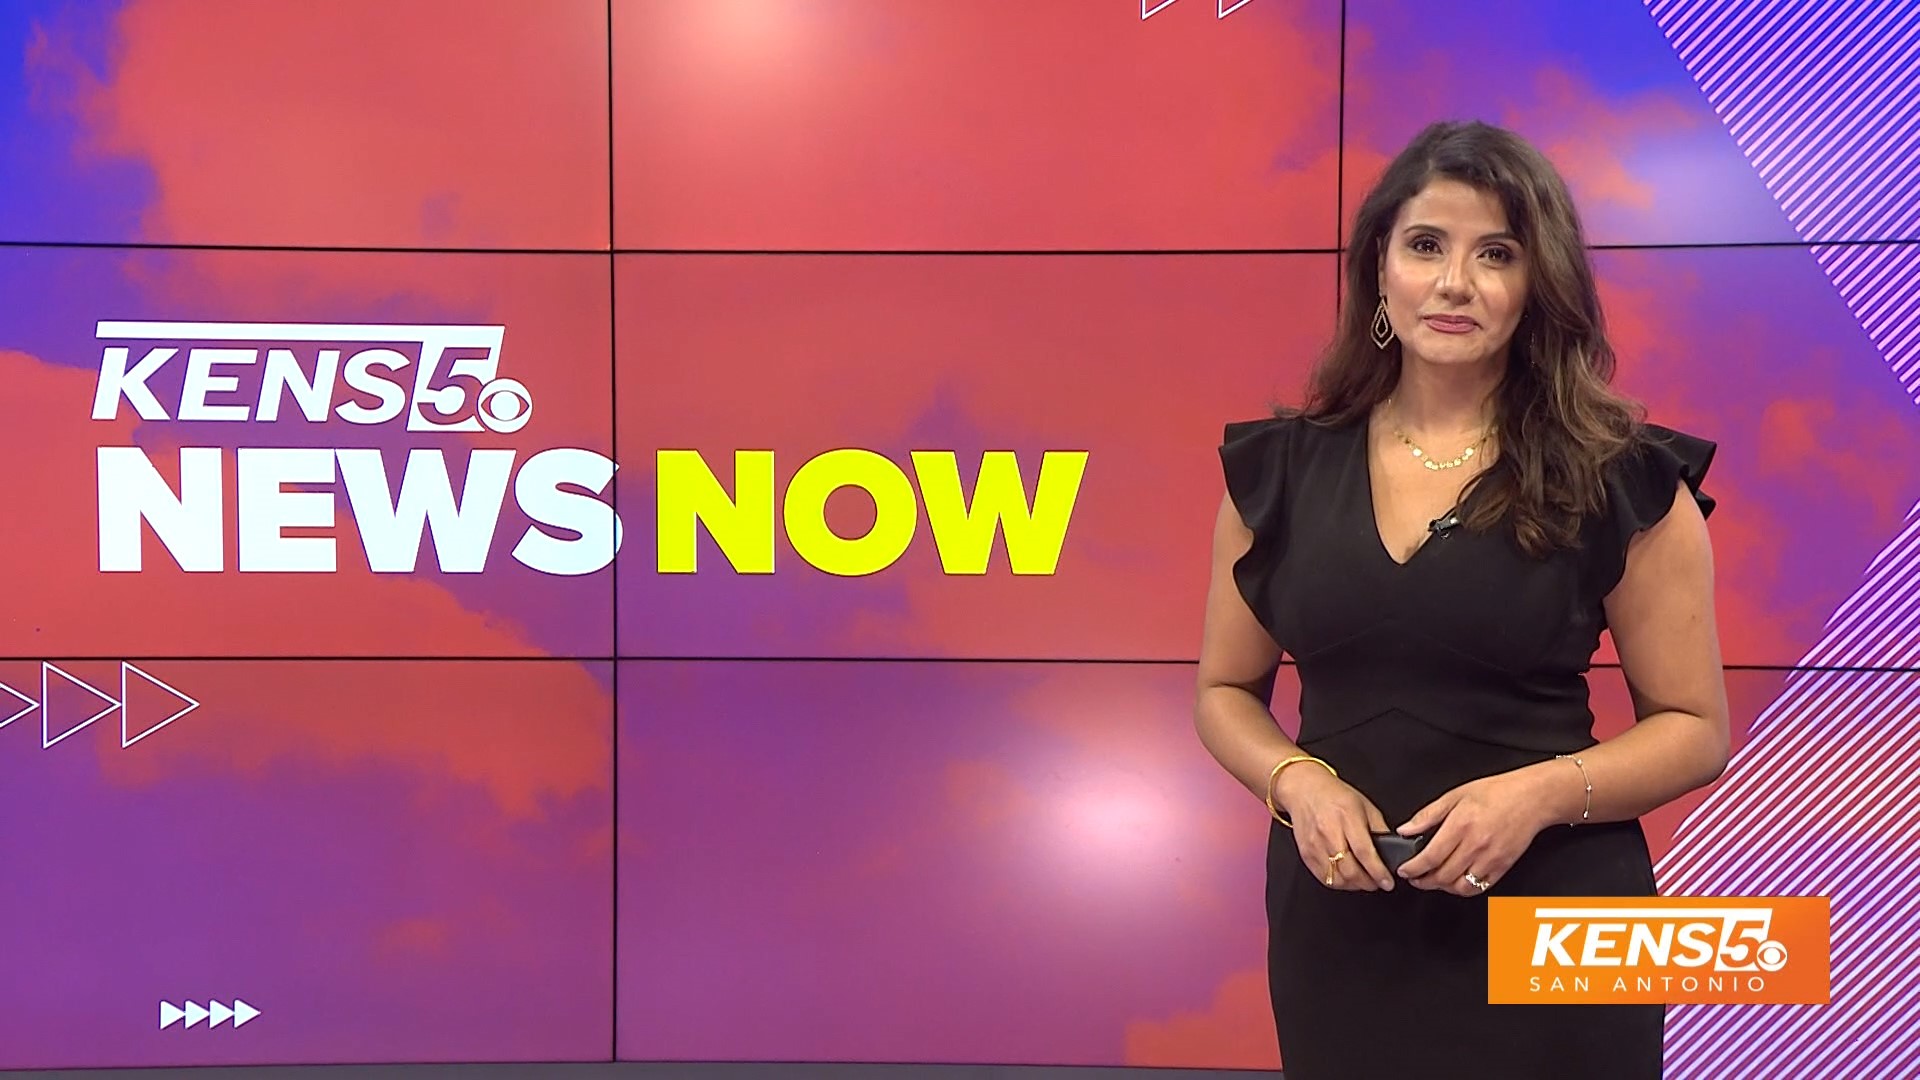 Follow us here to get the latest top headlines with KENS 5 anchor Sarah Forgany every weekday.